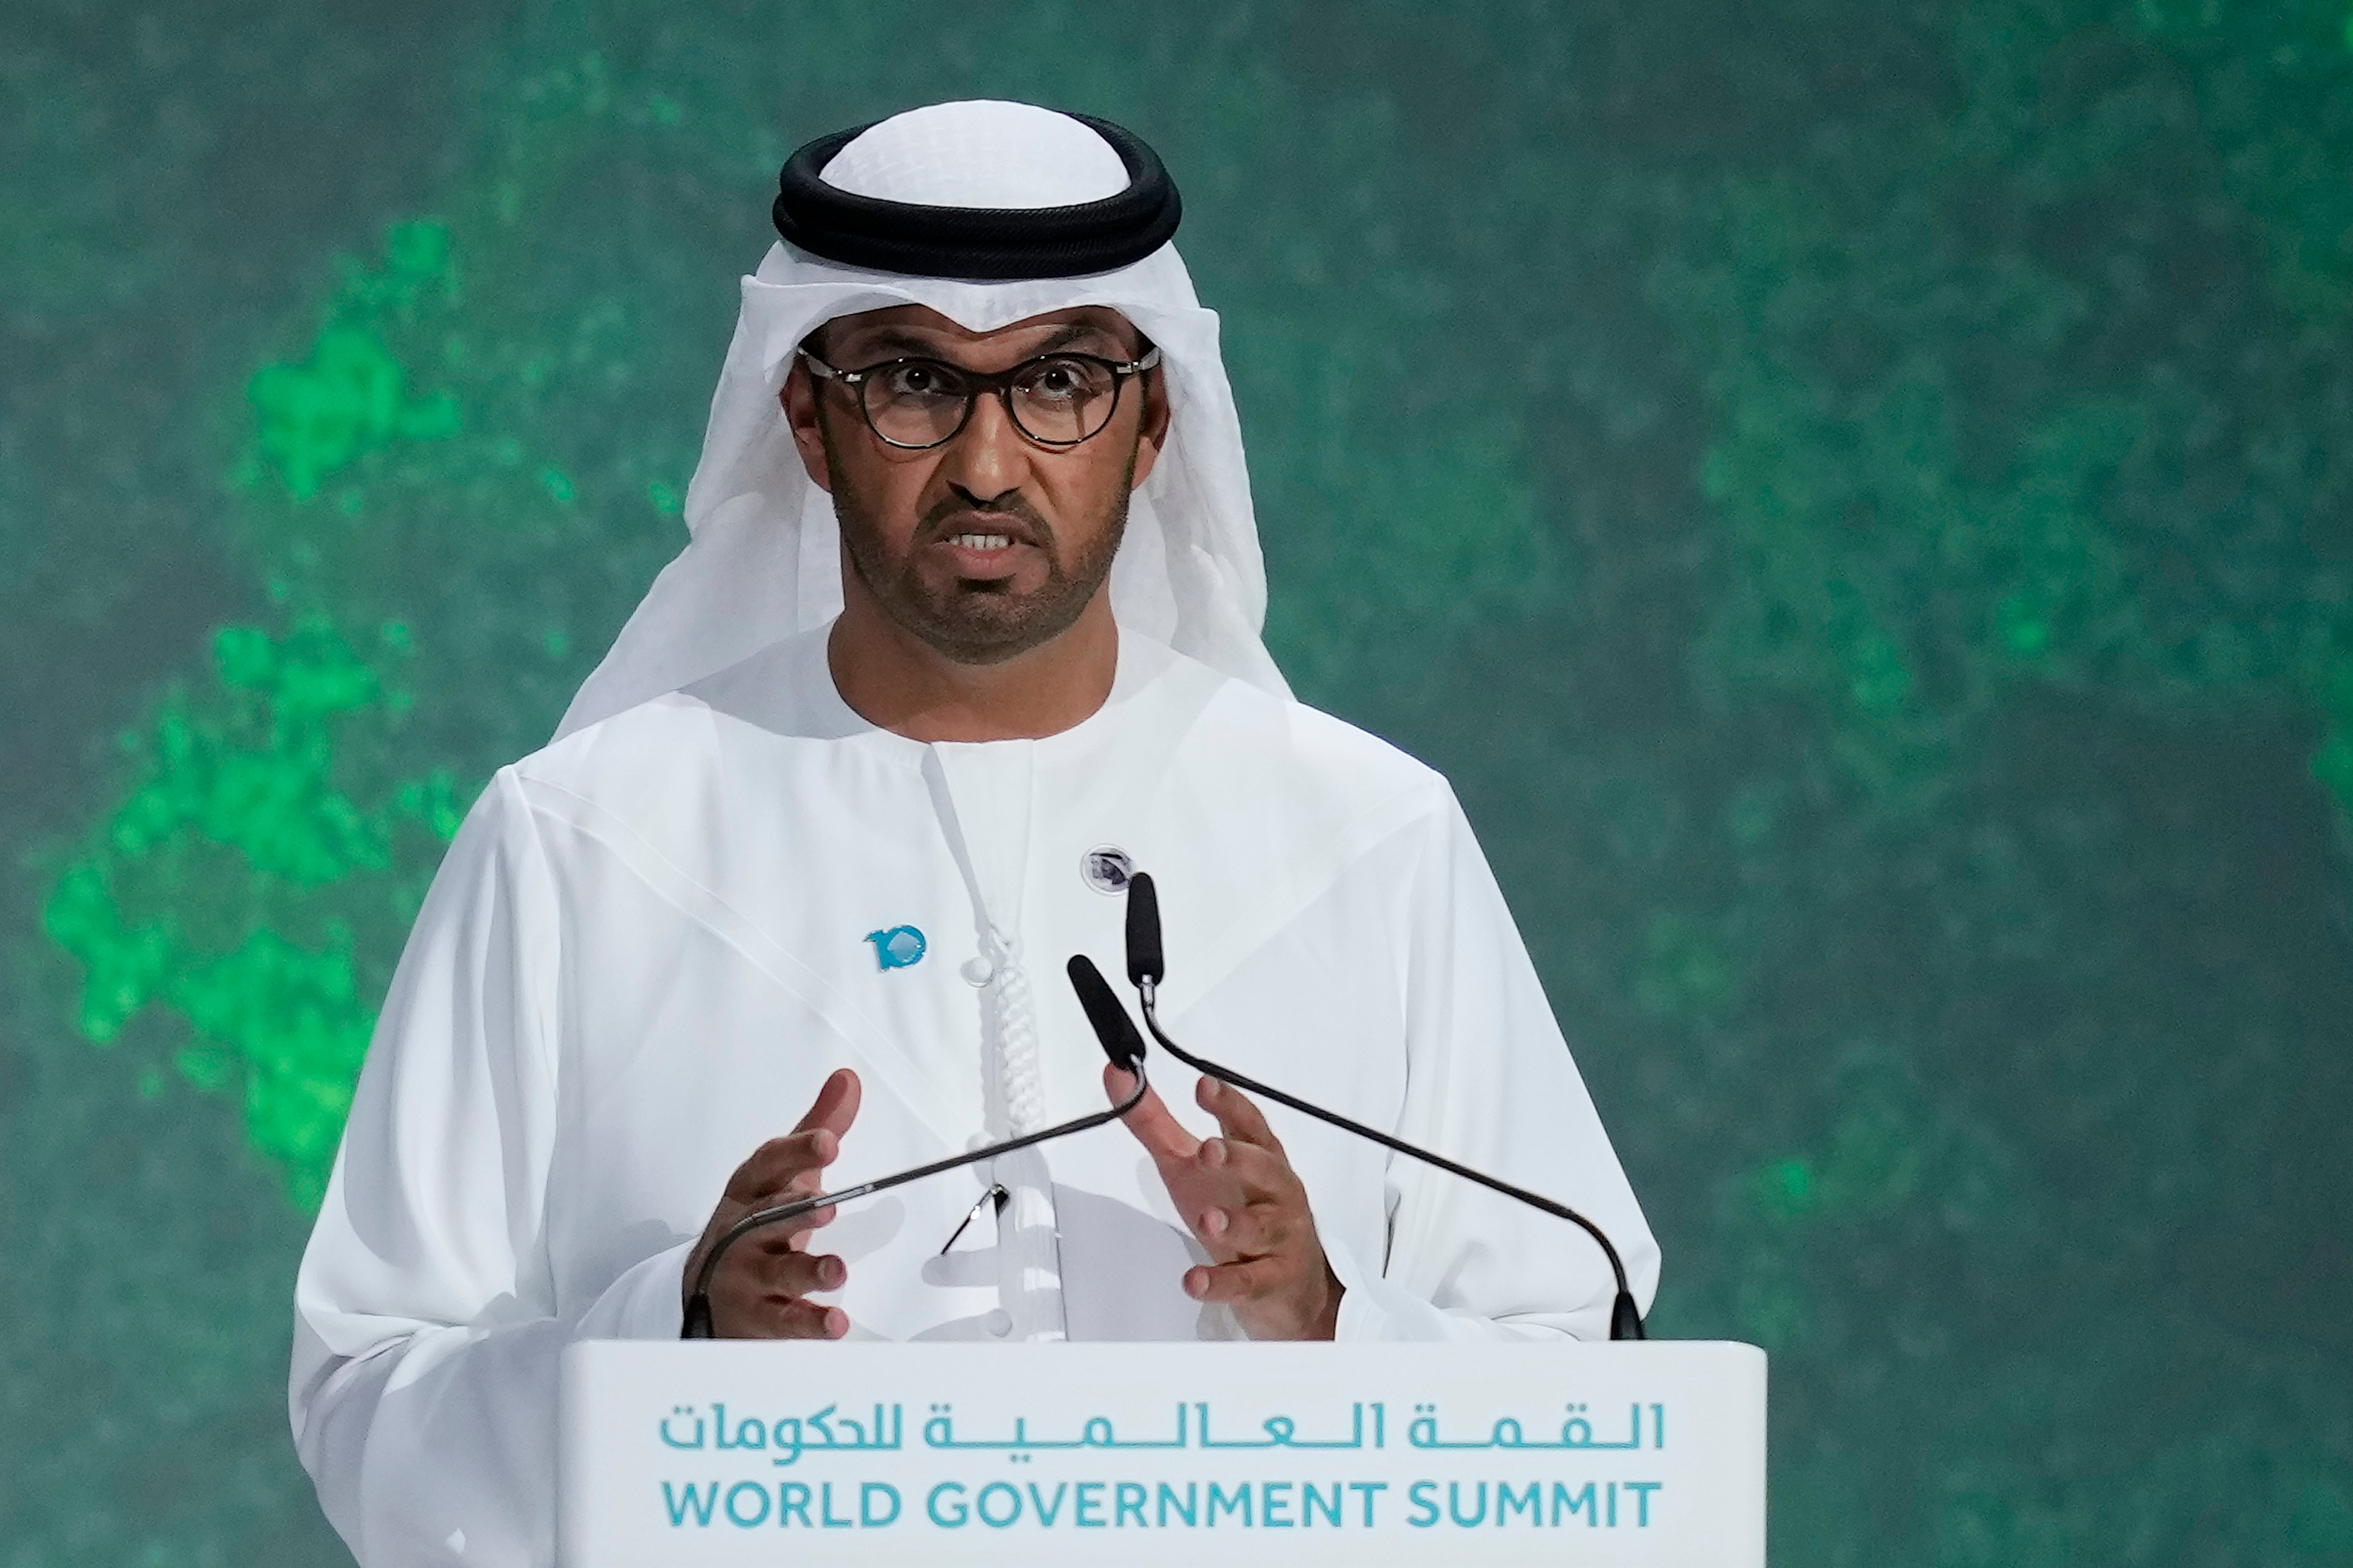 Sultan al-Jaber, the CEO of Abu Dhabi National Oil Co, was appointed to head this year’s climate talks in Dubai by UAE